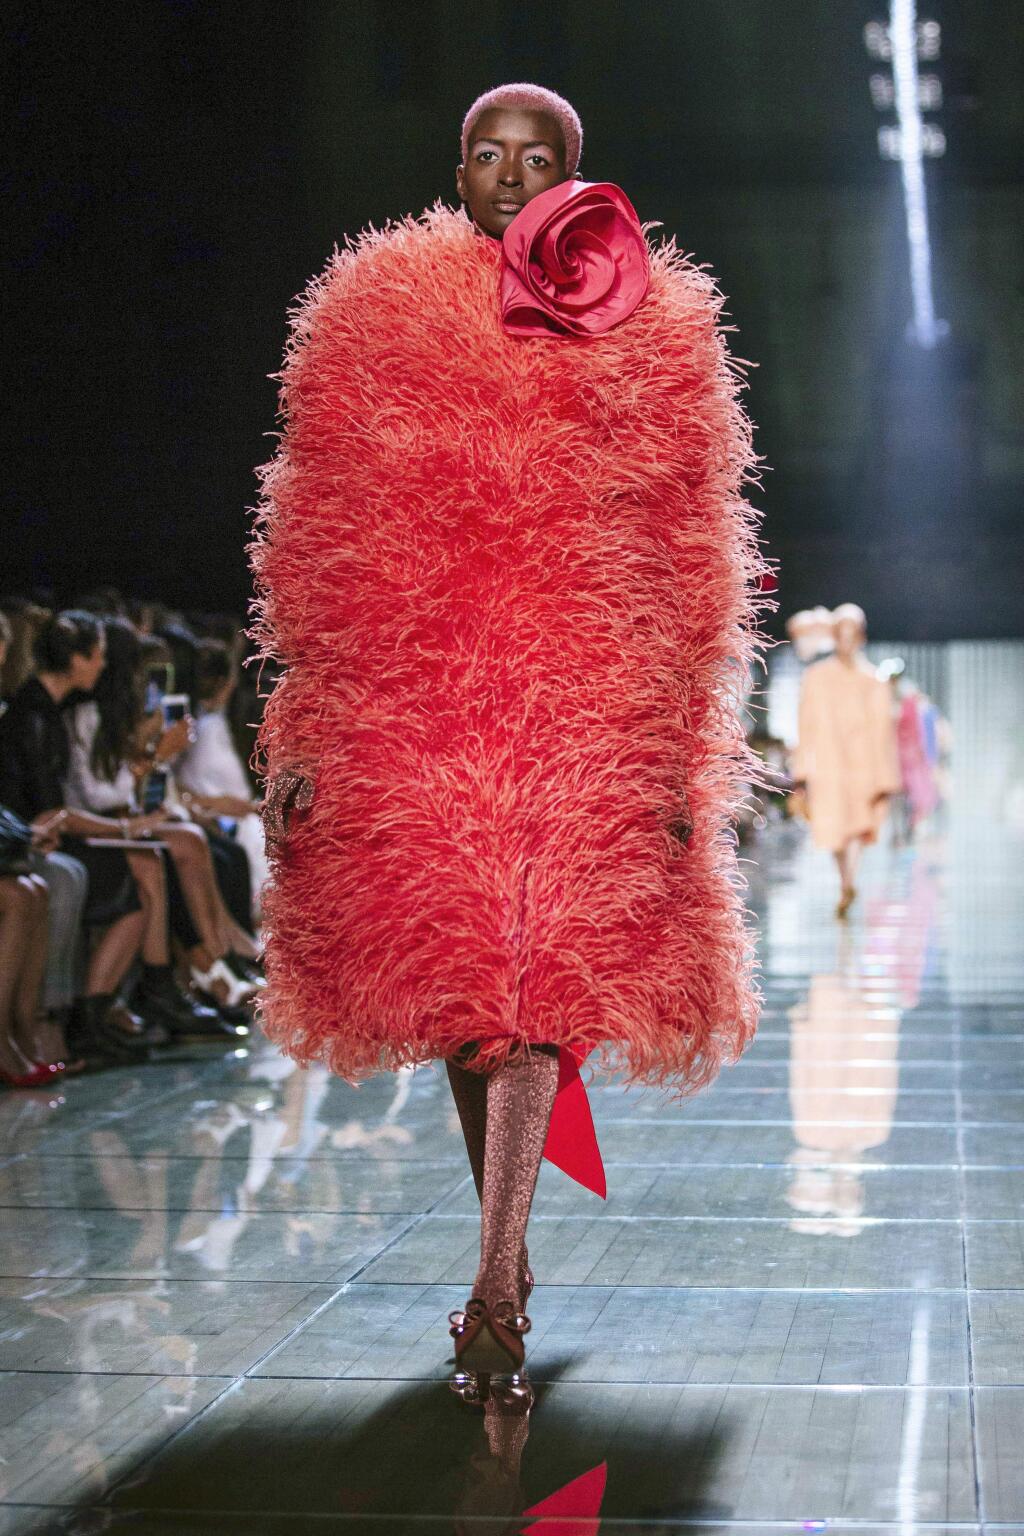 FILE - This Sept. 12, 2018 file photo shows a model wearing a coral outfit from the Marc Jacobs spring 2019 collection during Fashion Week in New York. Pantone Color Institute has chosen the color Living Coral as its 2019 color of the year. (AP Photo/Kevin Hagen)